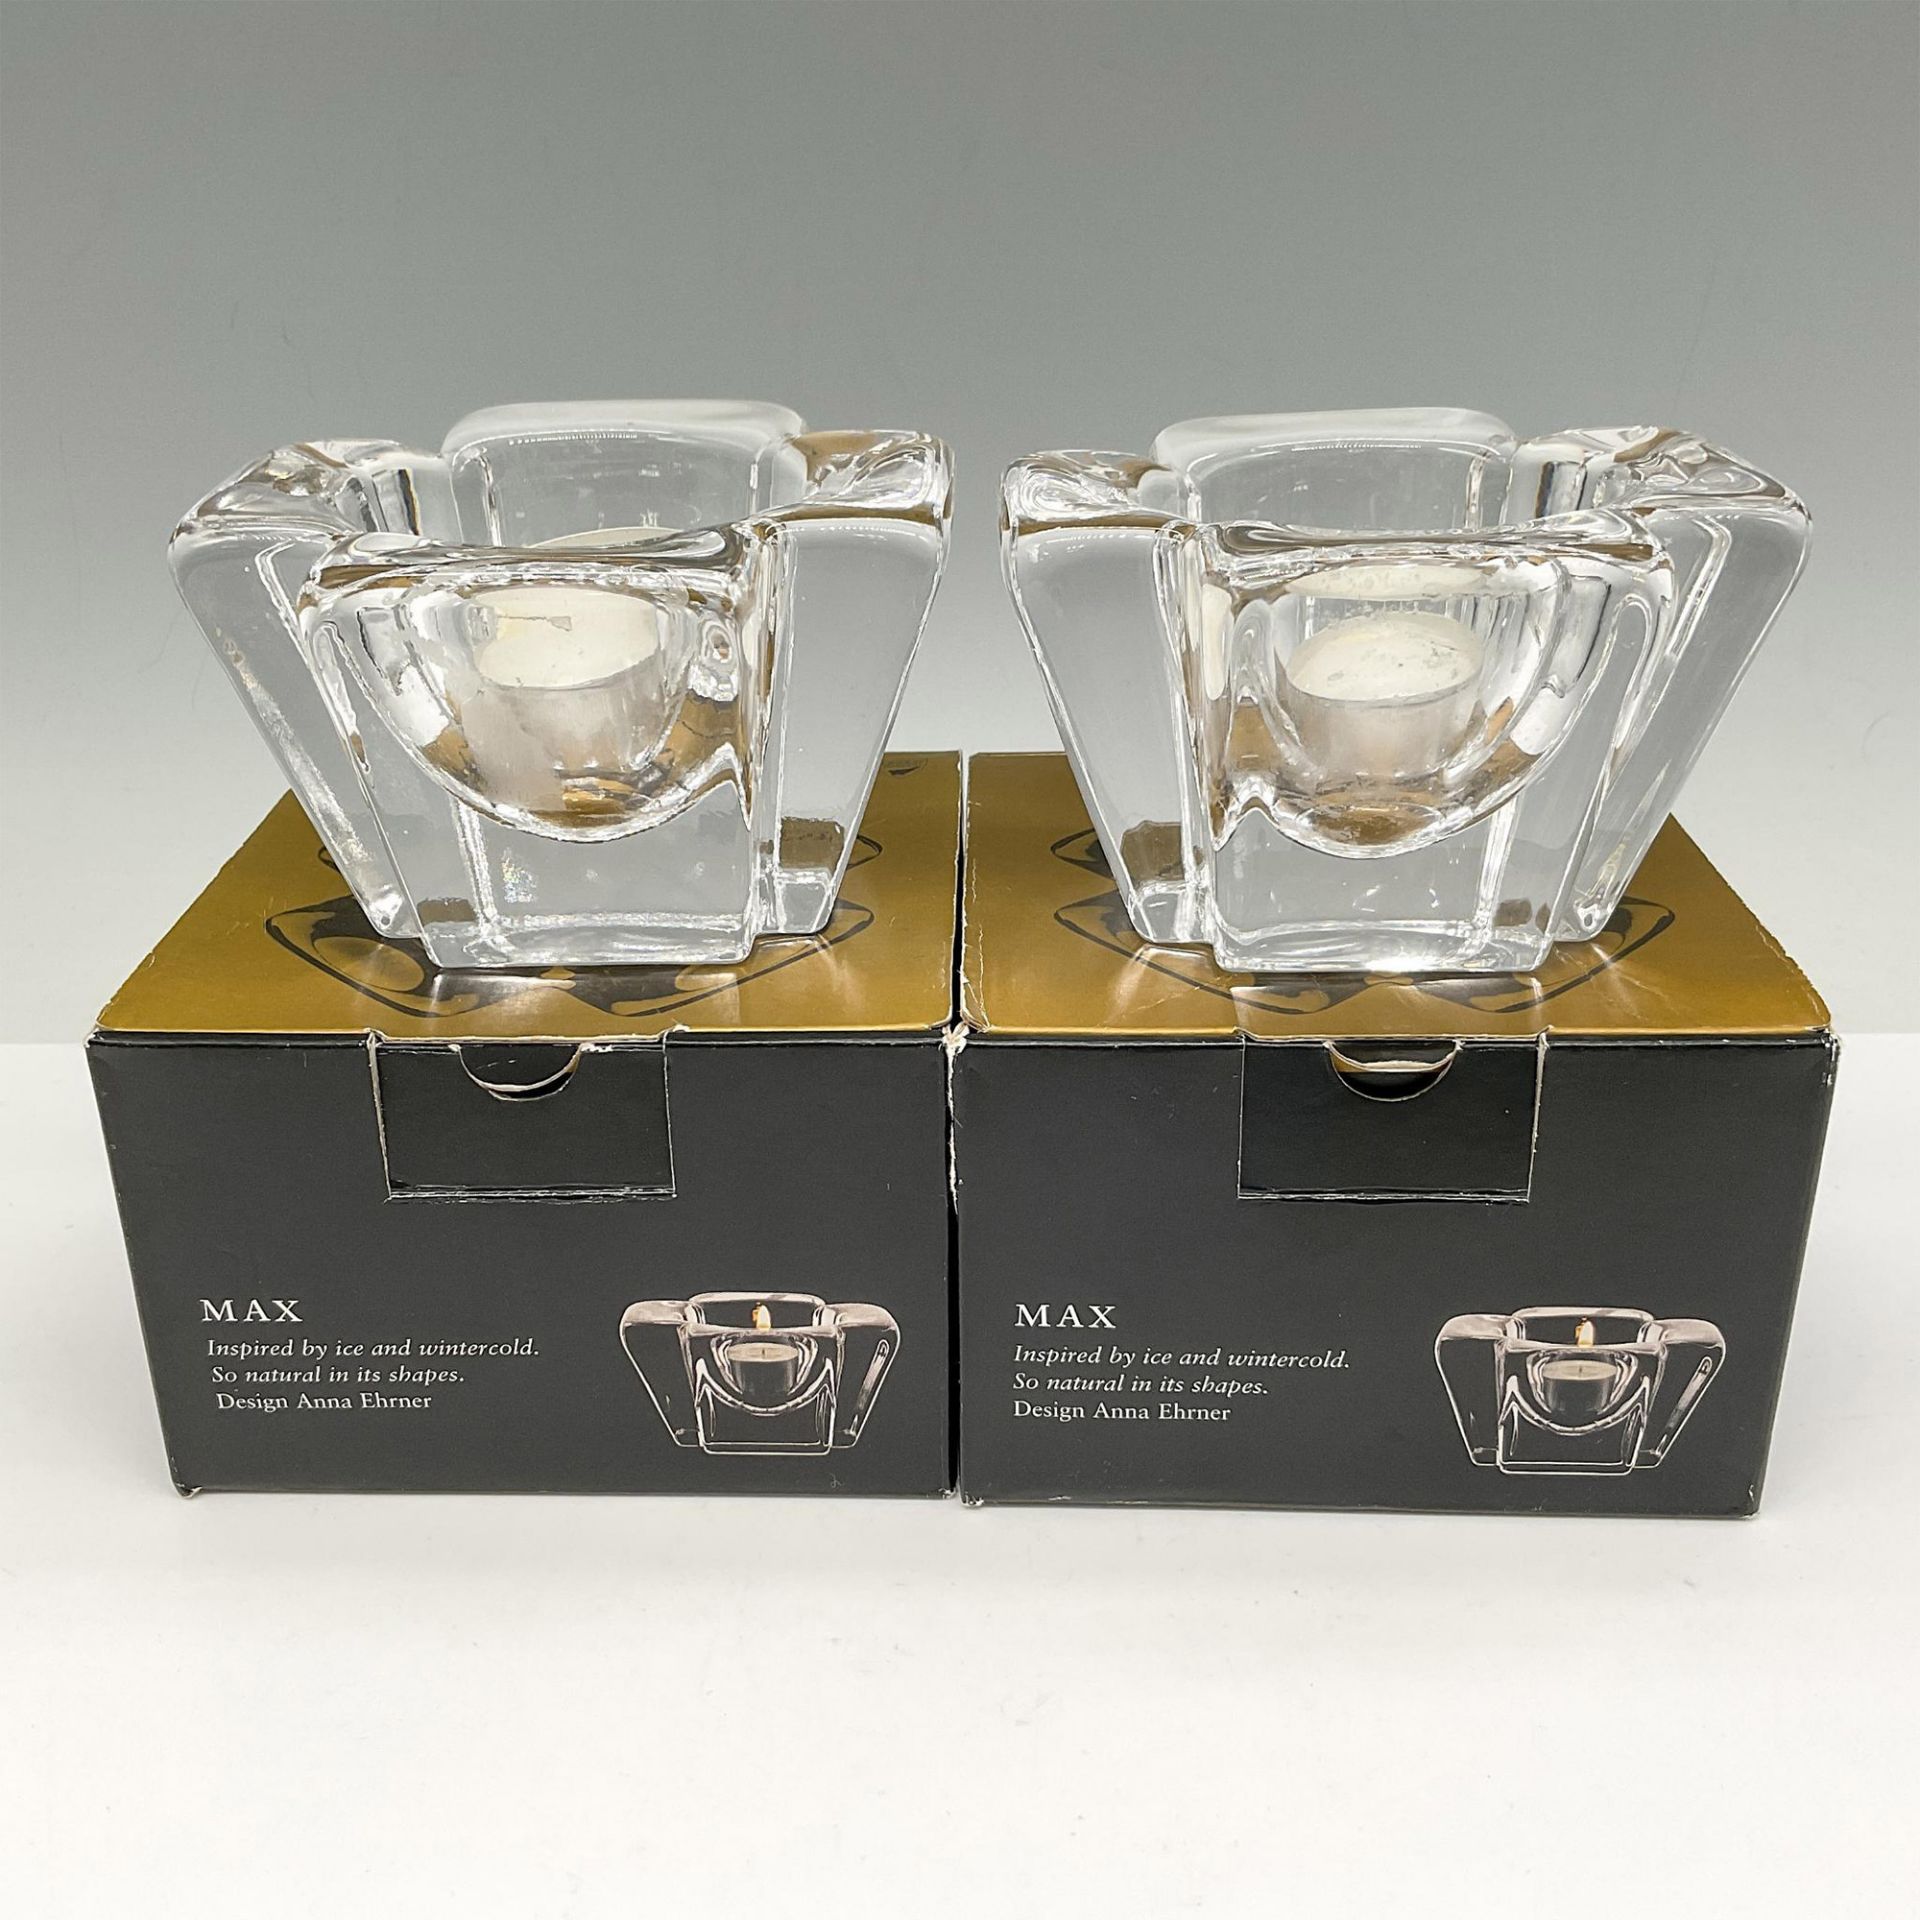 2pc Orrefors Crystal Candle Holders, Max - Image 4 of 4